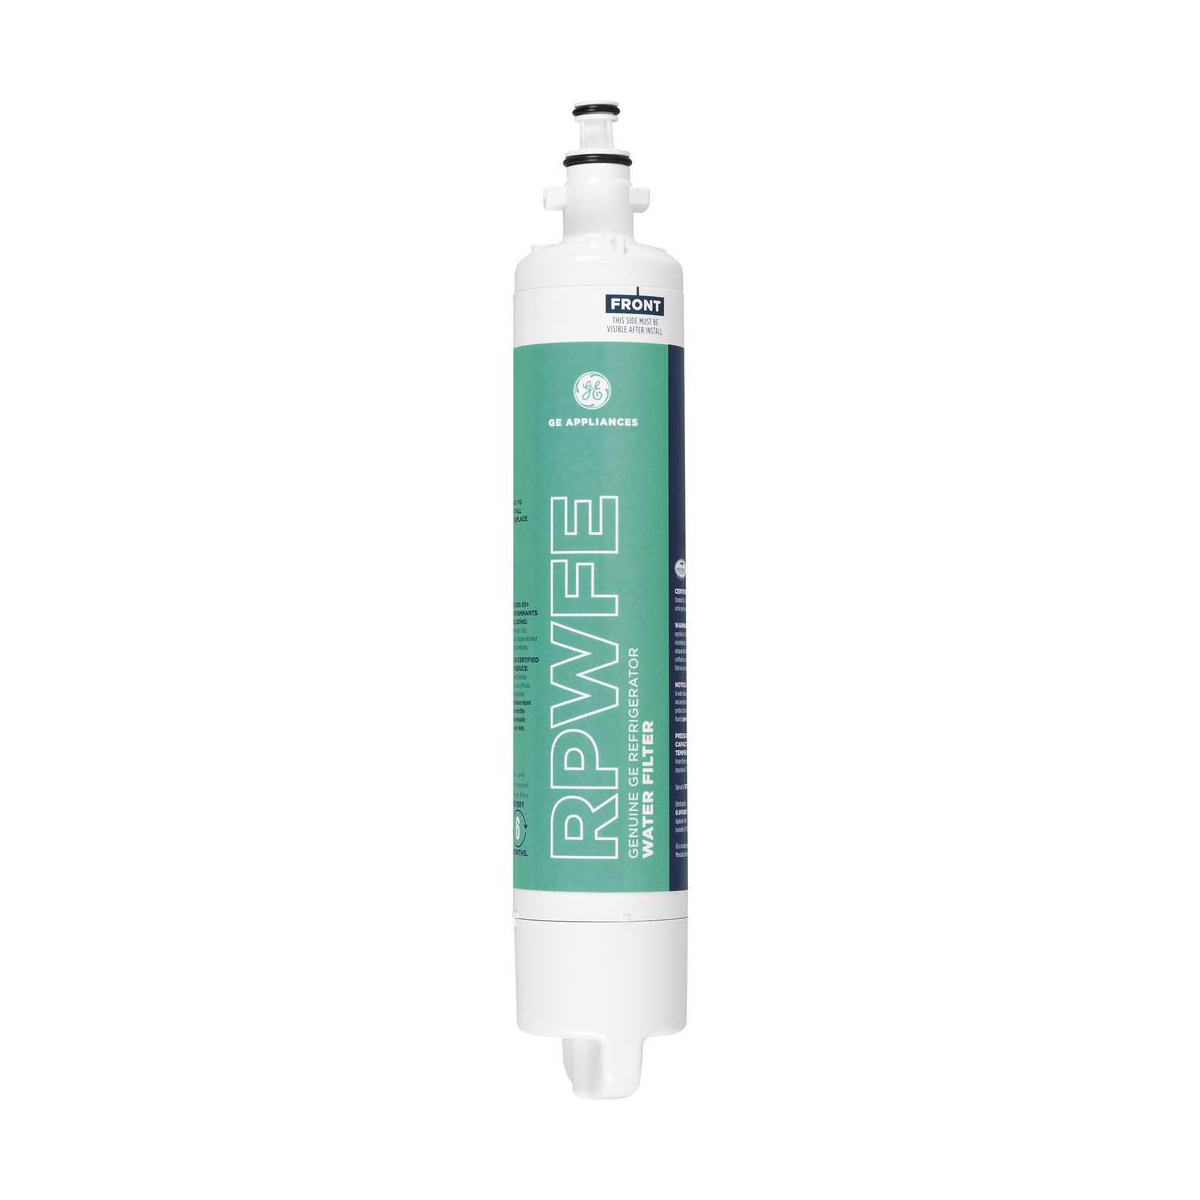 GENERAL ELECTRIC RPWFE Refrigerator Water Filter - image 1 of 9